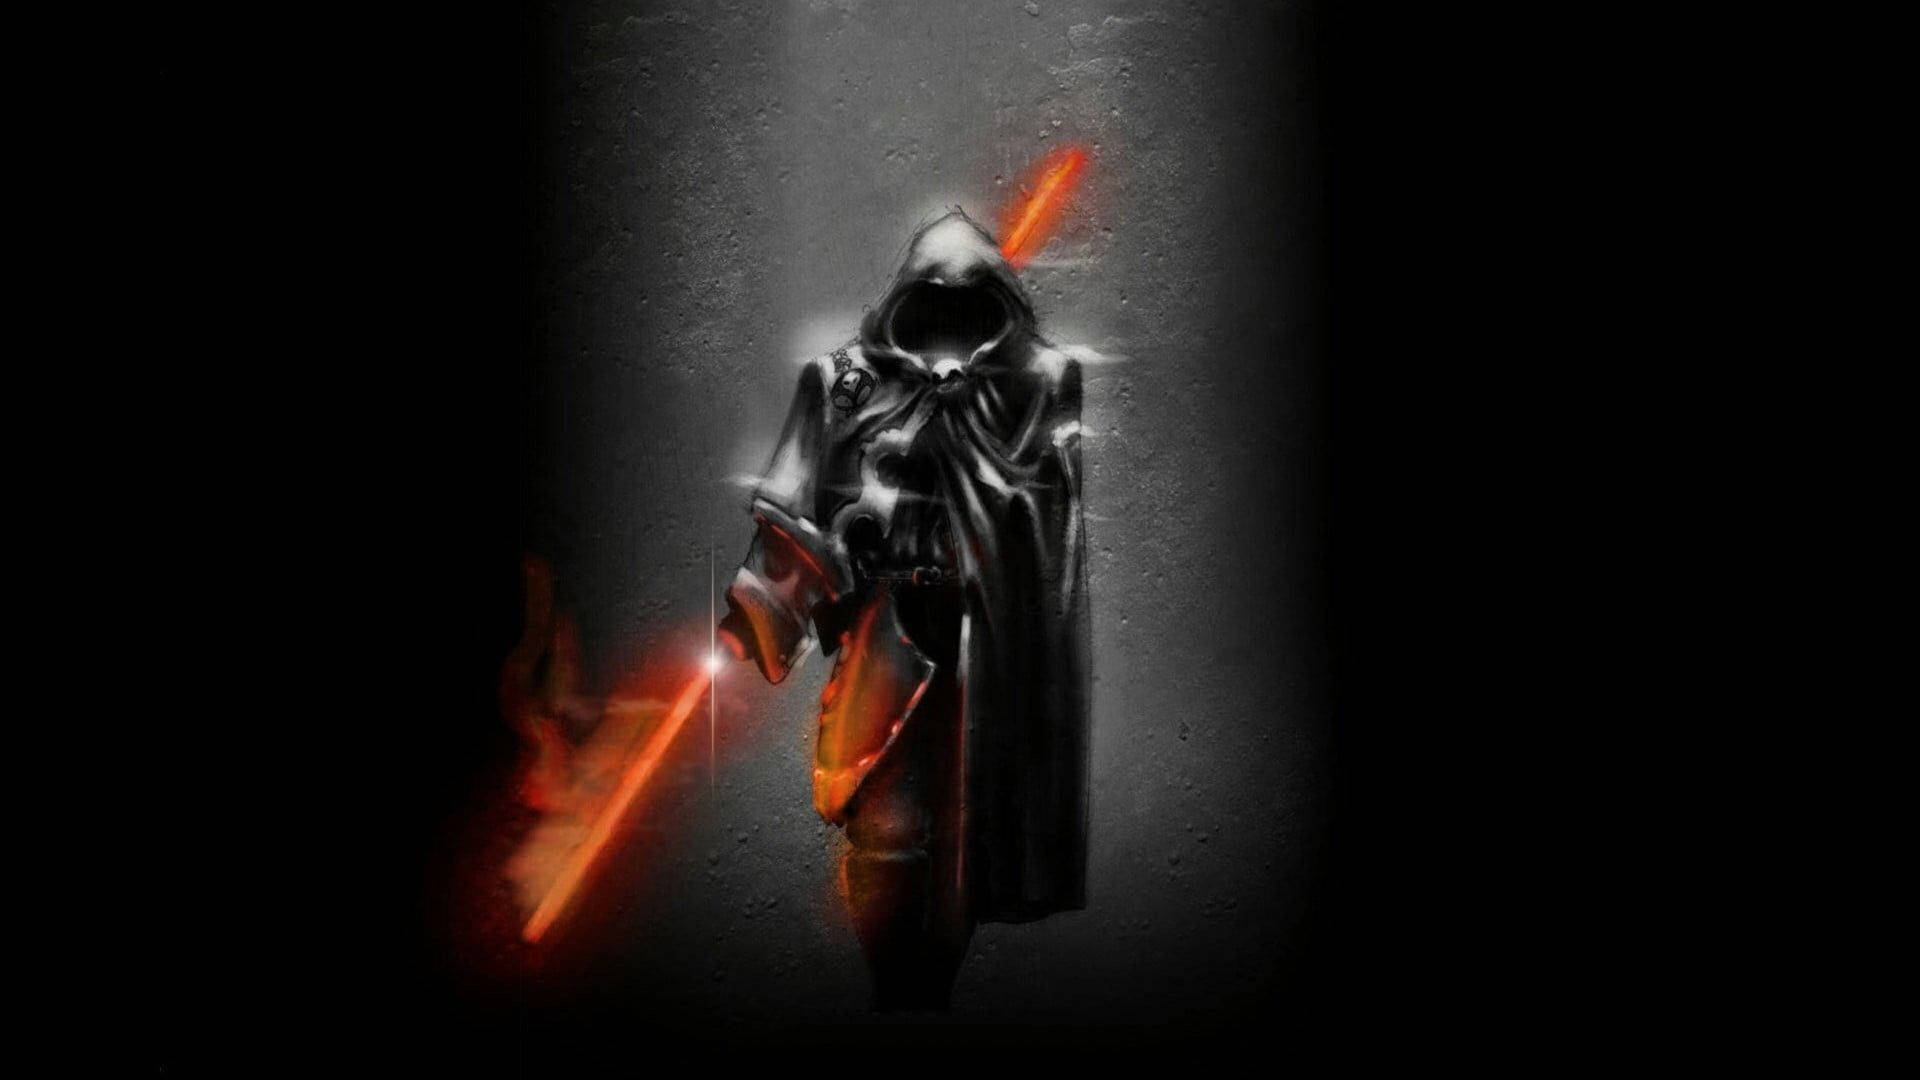 Darth Maul – The Infamous Sith Lord Background